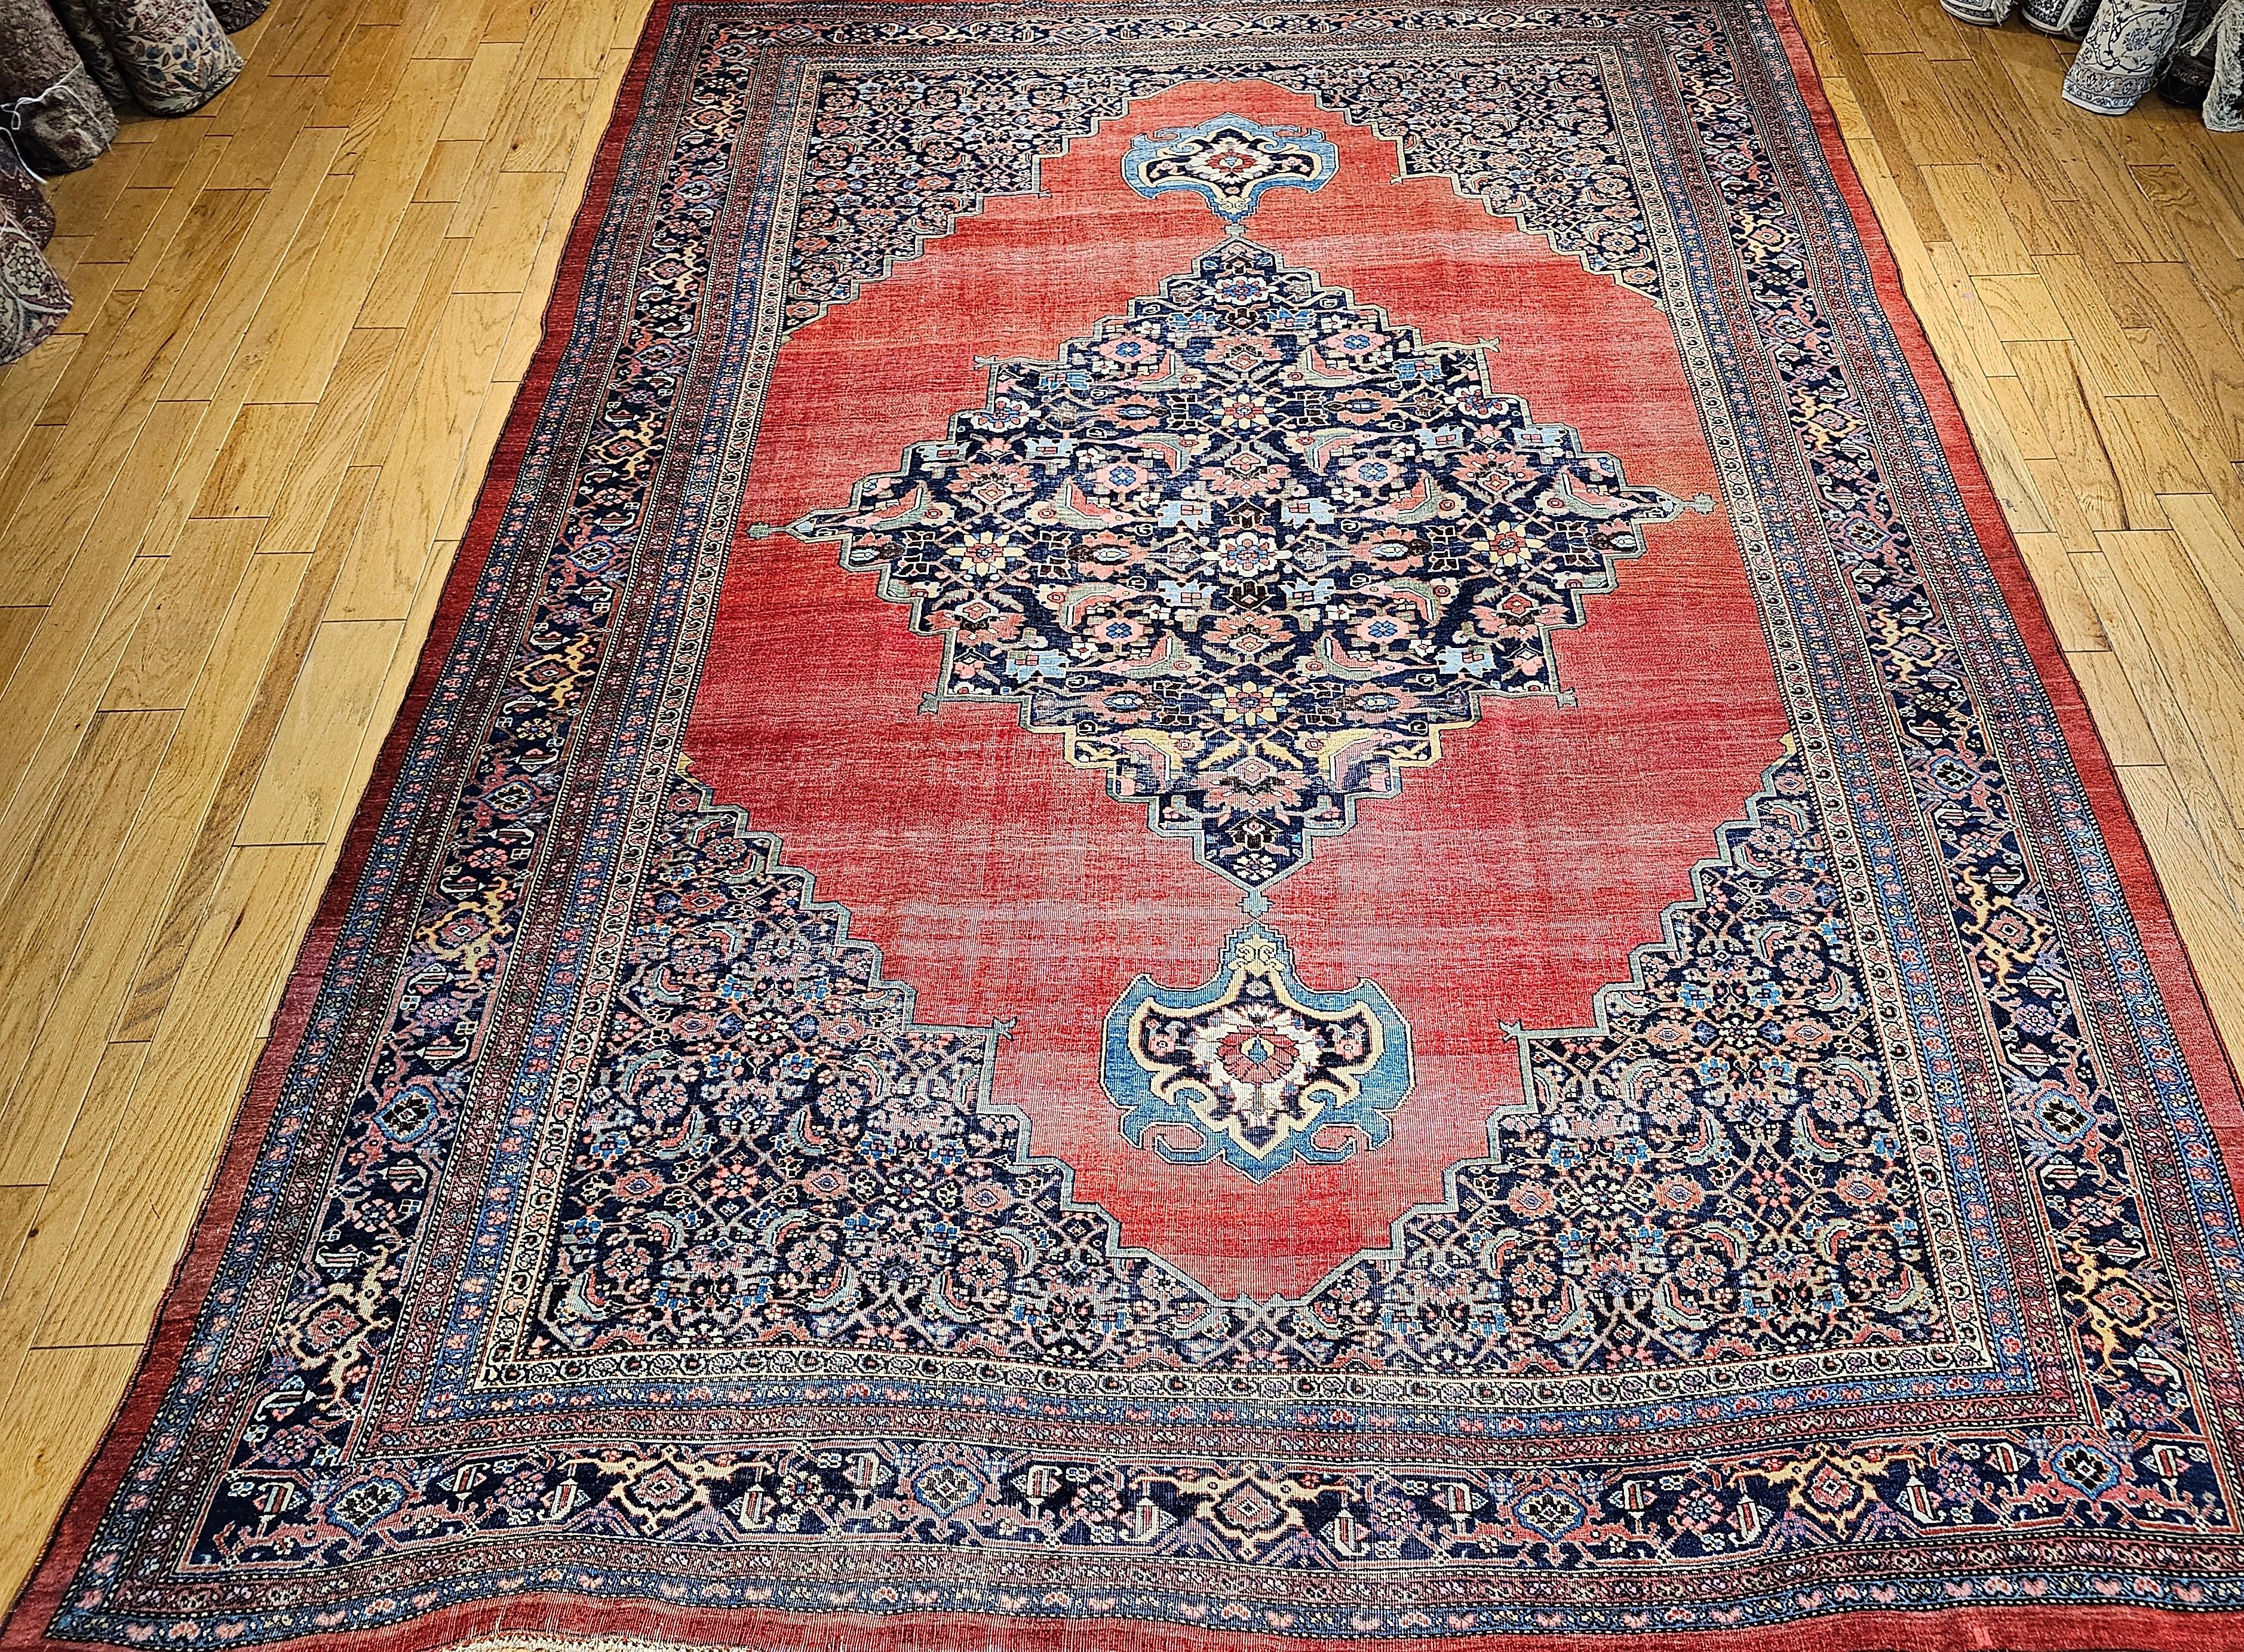 The oversized Bidjar (Bijar) rug is a unique and extremely desirable open field design in an abrash red color.  The design of the corner spandrels is Herati with accent colors in French blue, pink, cream, brown, cream, and yellow.  There is a